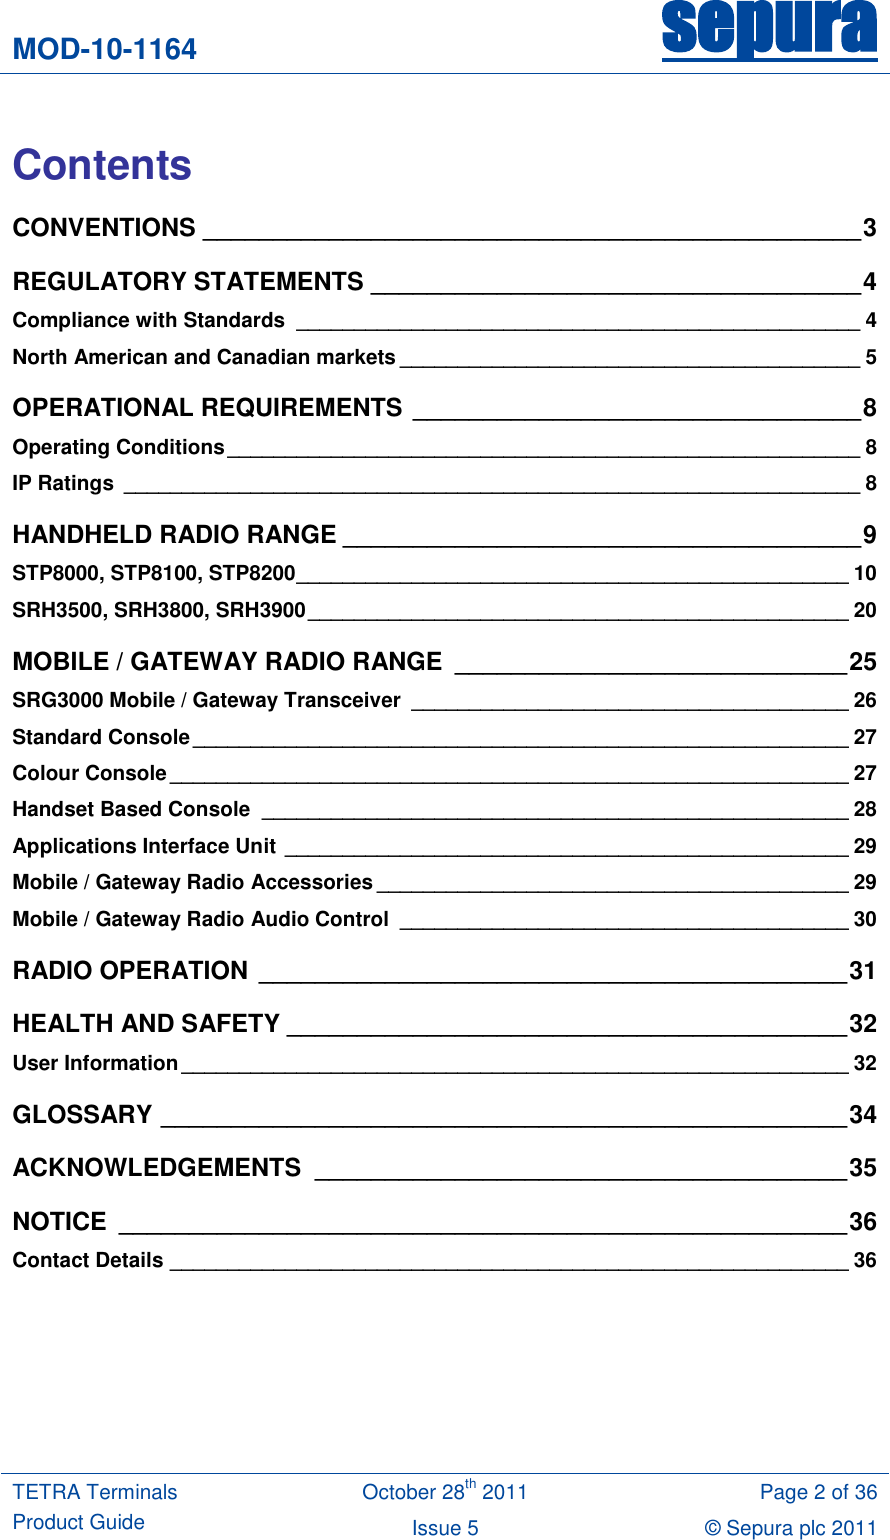 MOD-10-1164 sepura  TETRA Terminals Product Guide October 28th 2011 Page 2 of 36 Issue 5 © Sepura plc 2011    Contents CONVENTIONS _______________________________________________ 3 REGULATORY STATEMENTS ___________________________________ 4 Compliance with Standards  _________________________________________________ 4 North American and Canadian markets ________________________________________ 5 OPERATIONAL REQUIREMENTS ________________________________ 8 Operating Conditions _______________________________________________________ 8 IP Ratings  ________________________________________________________________ 8 HANDHELD RADIO RANGE _____________________________________ 9 STP8000, STP8100, STP8200 ________________________________________________ 10 SRH3500, SRH3800, SRH3900 _______________________________________________ 20 MOBILE / GATEWAY RADIO RANGE  ____________________________ 25 SRG3000 Mobile / Gateway Transceiver  ______________________________________ 26 Standard Console _________________________________________________________ 27 Colour Console ___________________________________________________________ 27 Handset Based Console  ___________________________________________________ 28 Applications Interface Unit _________________________________________________ 29 Mobile / Gateway Radio Accessories _________________________________________ 29 Mobile / Gateway Radio Audio Control  _______________________________________ 30 RADIO OPERATION __________________________________________ 31 HEALTH AND SAFETY ________________________________________ 32 User Information __________________________________________________________ 32 GLOSSARY _________________________________________________ 34 ACKNOWLEDGEMENTS  ______________________________________ 35 NOTICE  ____________________________________________________ 36 Contact Details ___________________________________________________________ 36  